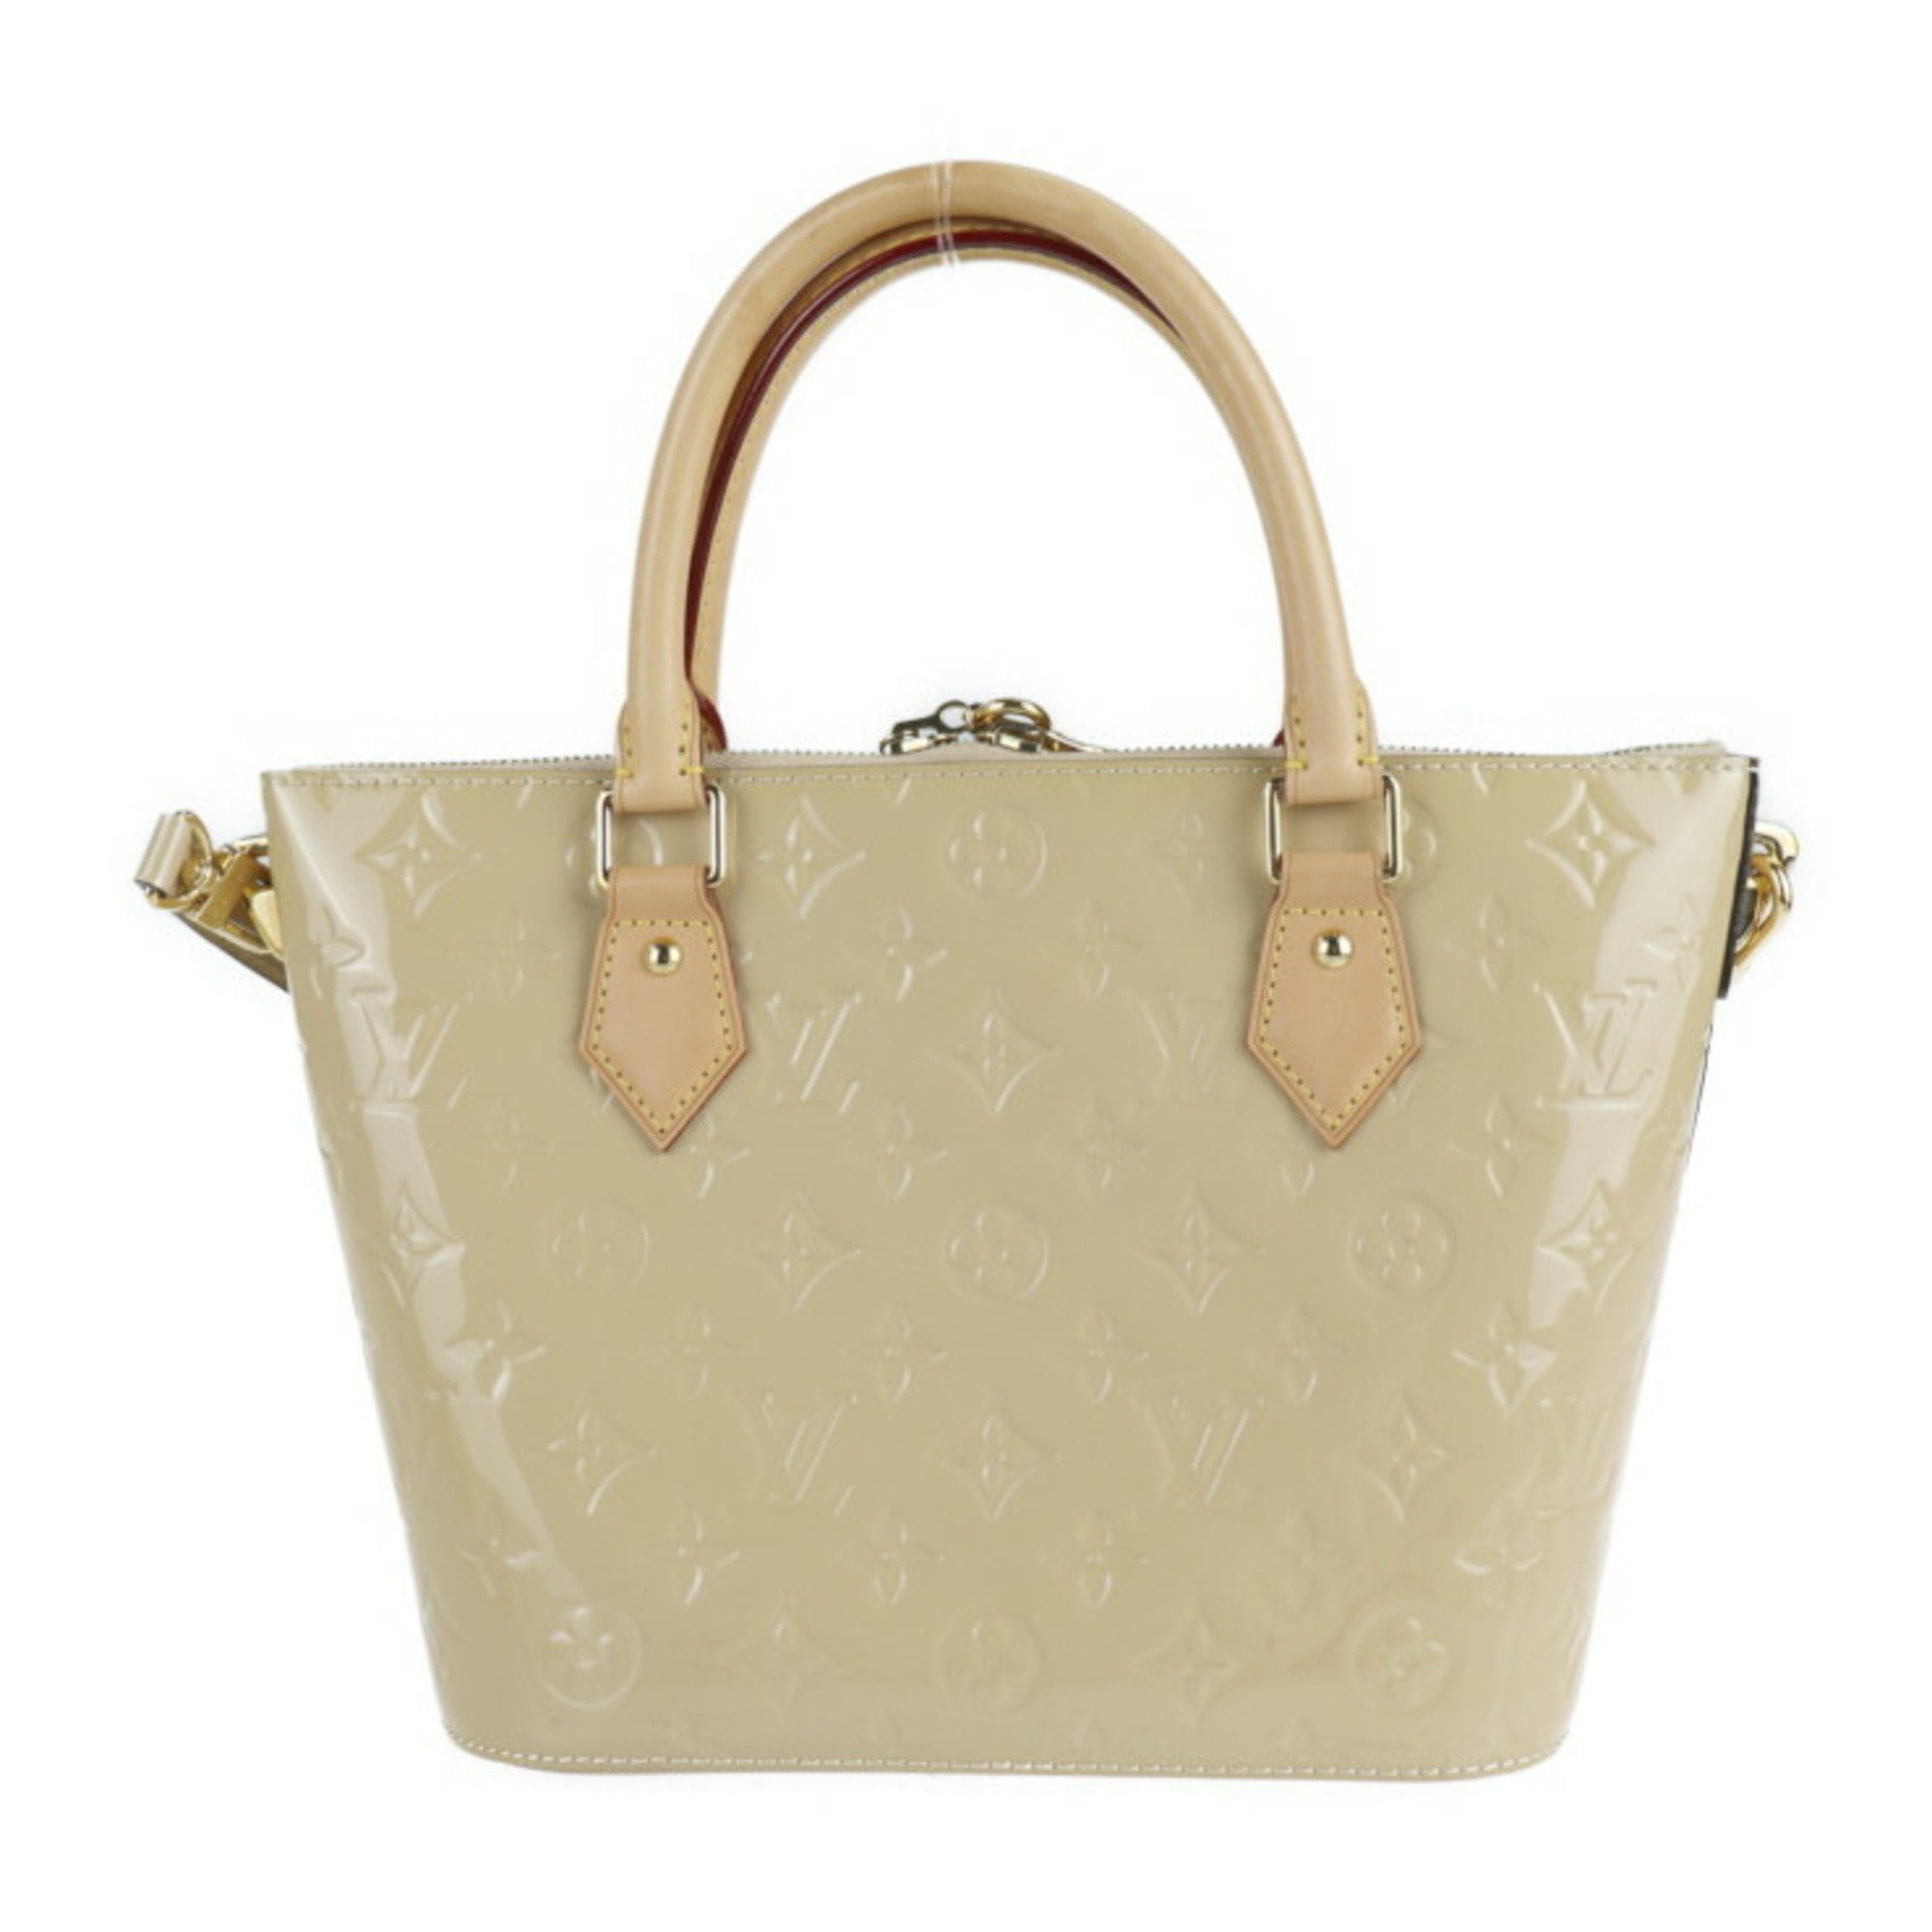 Louis Vuitton Brown/Black Monogram Canvas And Patent Leather Star